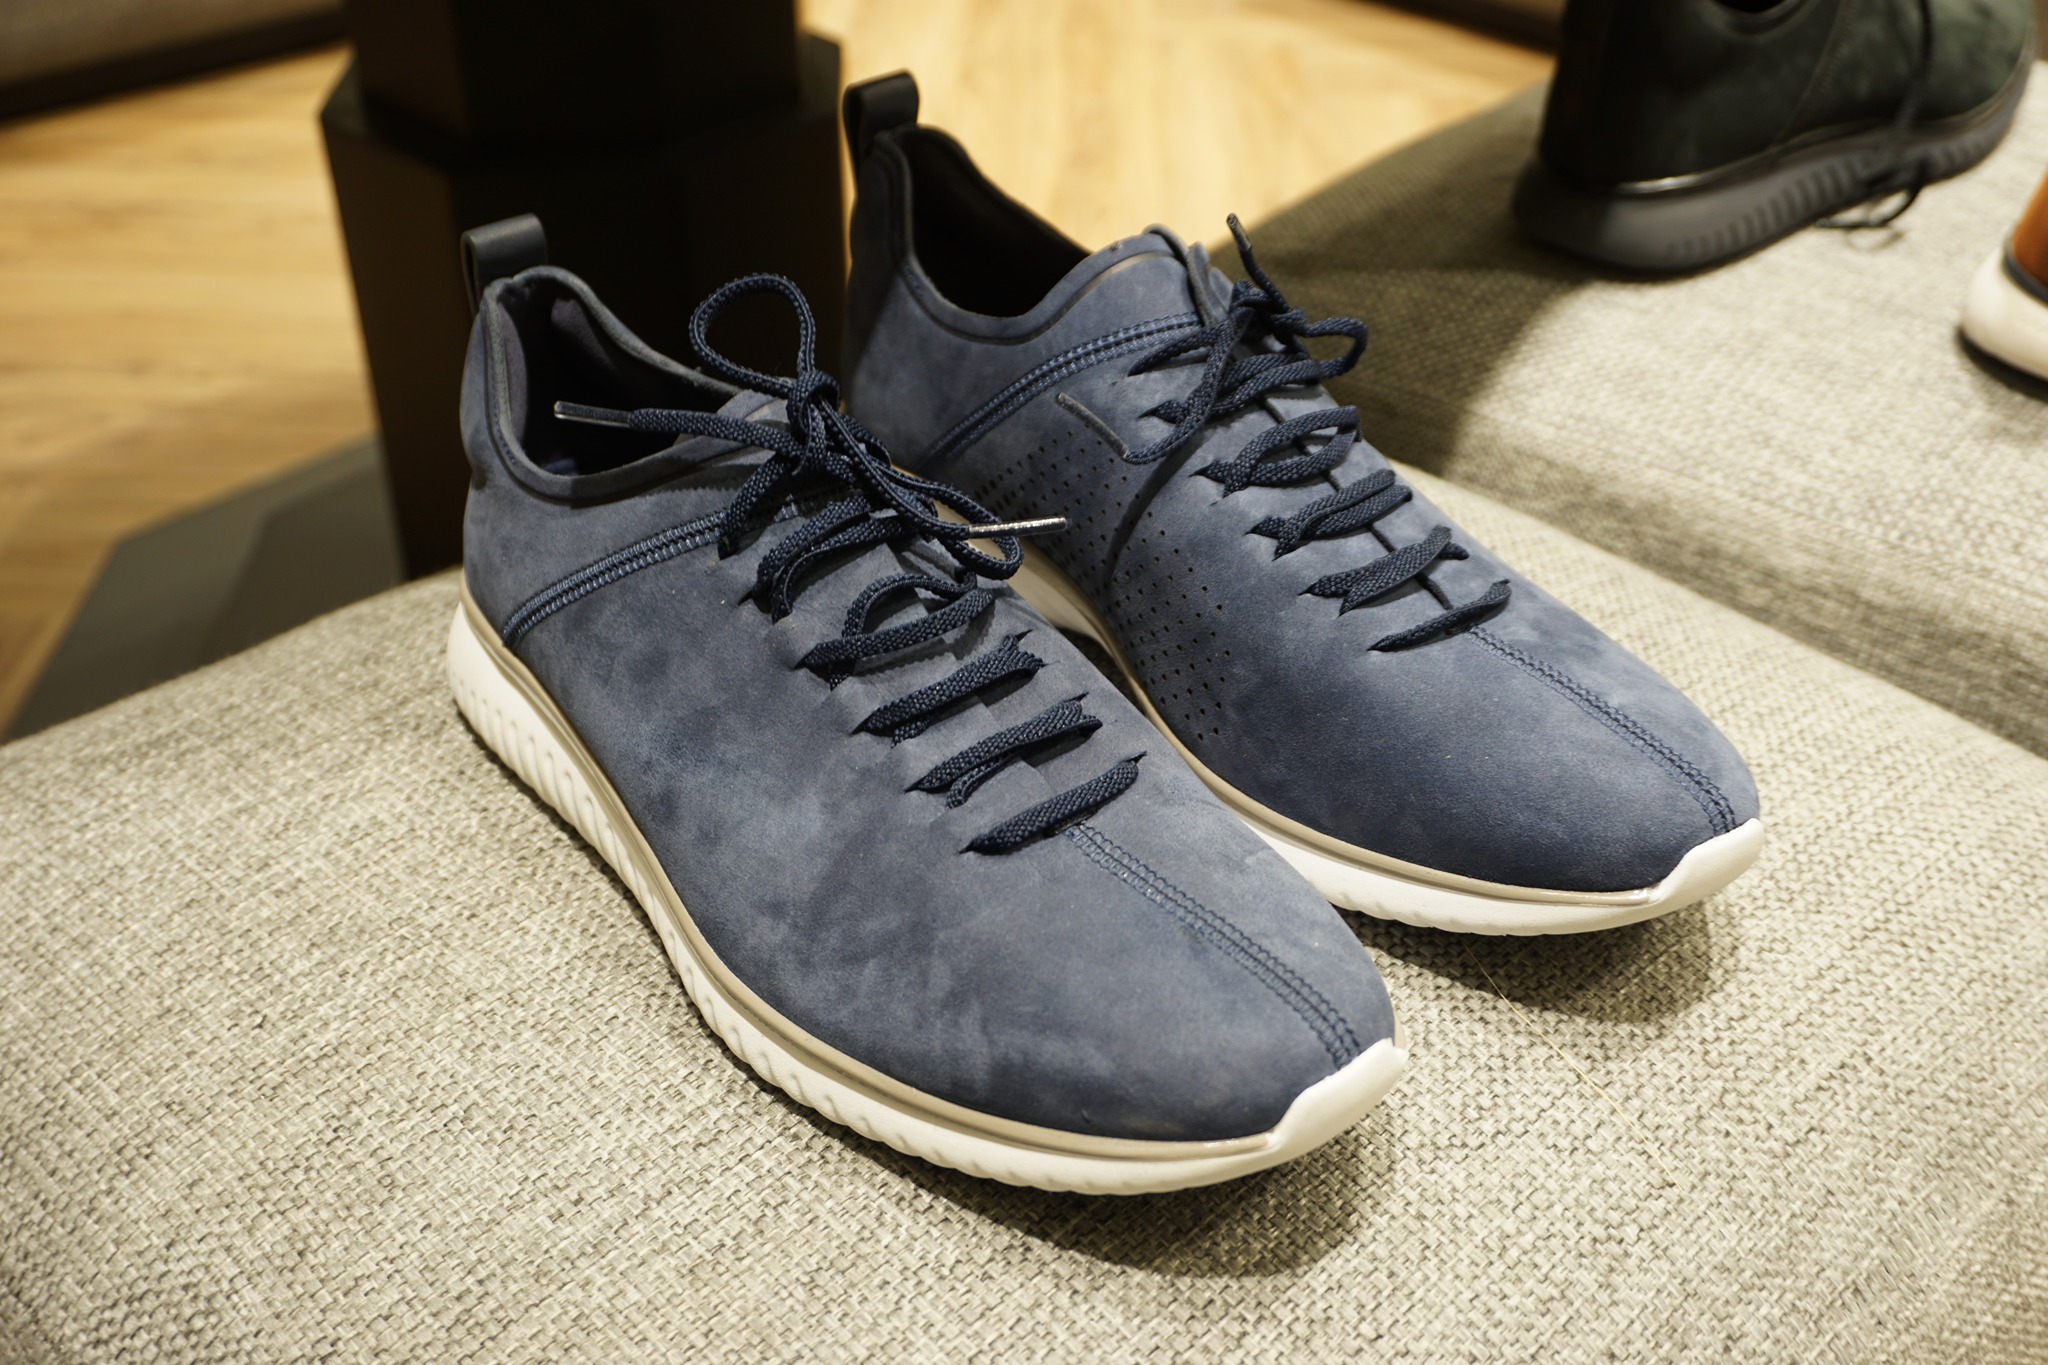 Cole Haan Unveils Their Fall 2017 Men’s Shoe Collection at Ayala Malls ...